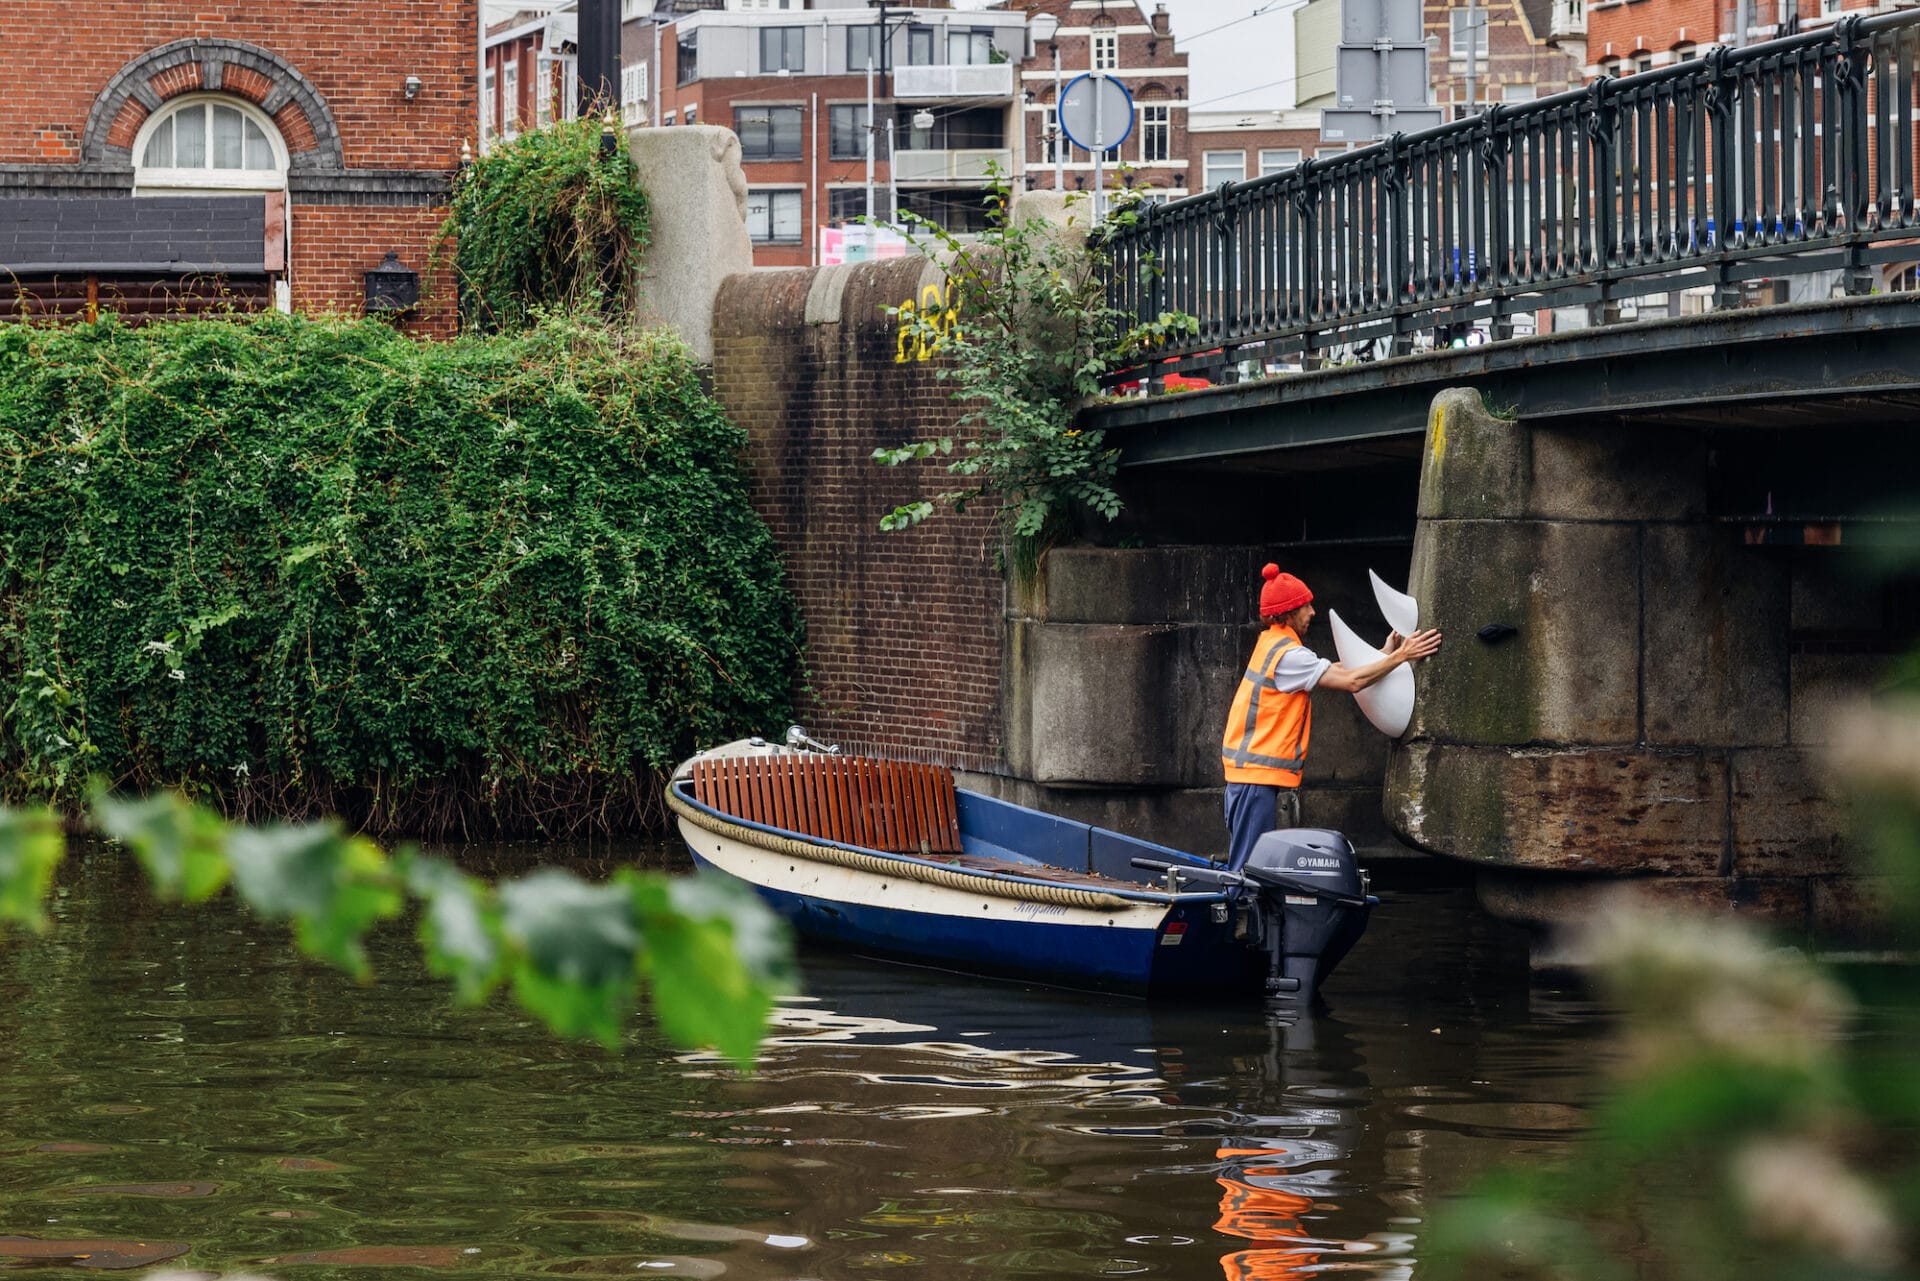 Artist Frankey stands in a boat in an Amsterdam canal and places sculptural pieces onto the side of a bridge